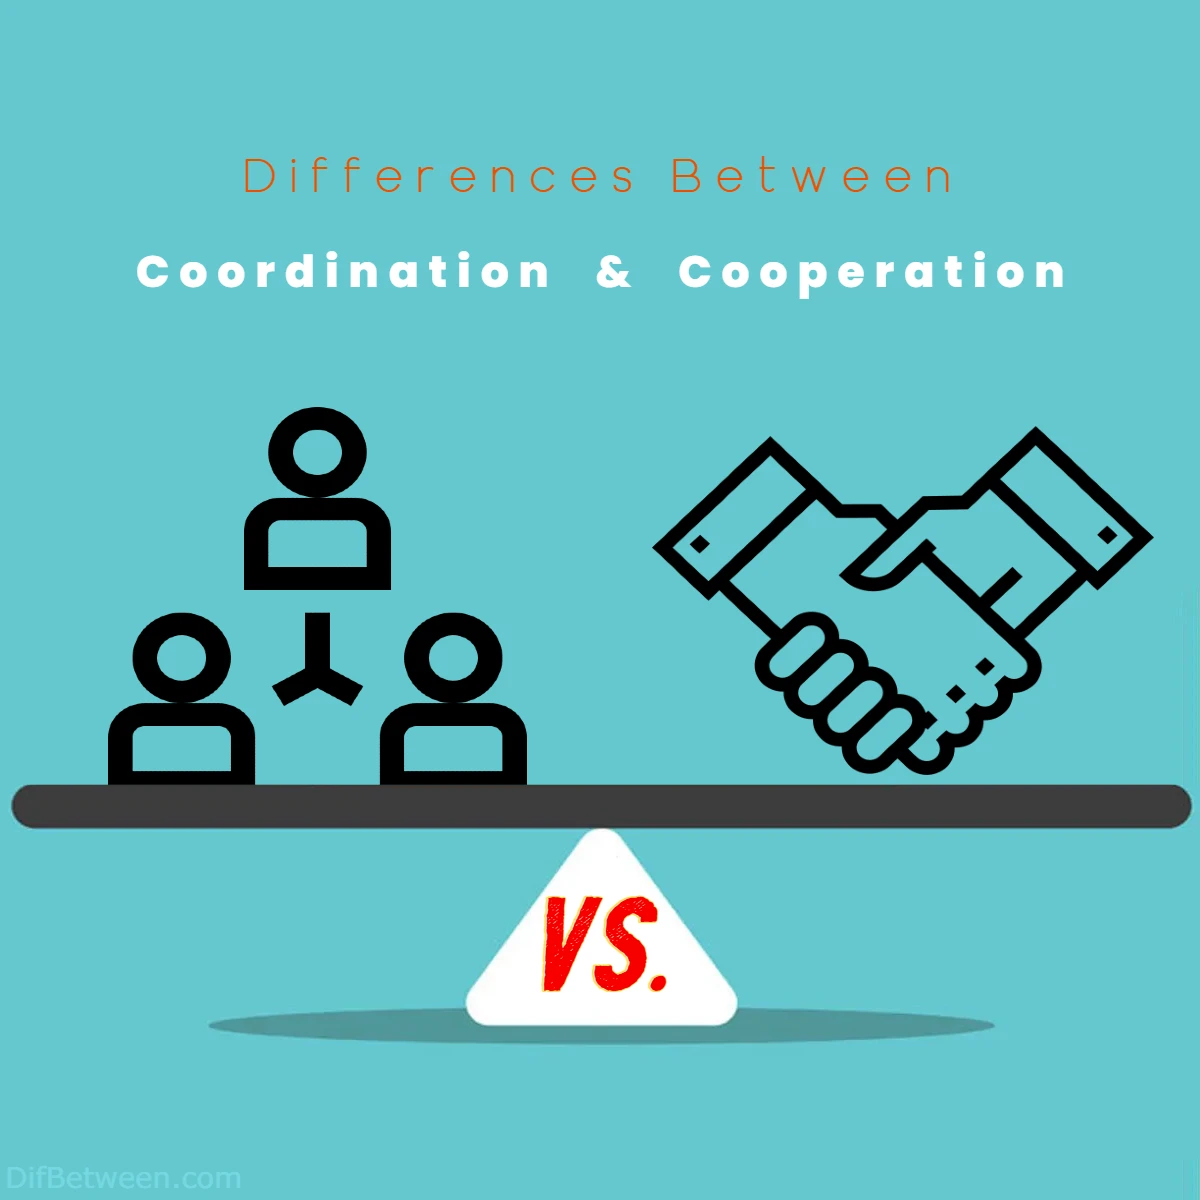 Differences Between Coordination vs Cooperation